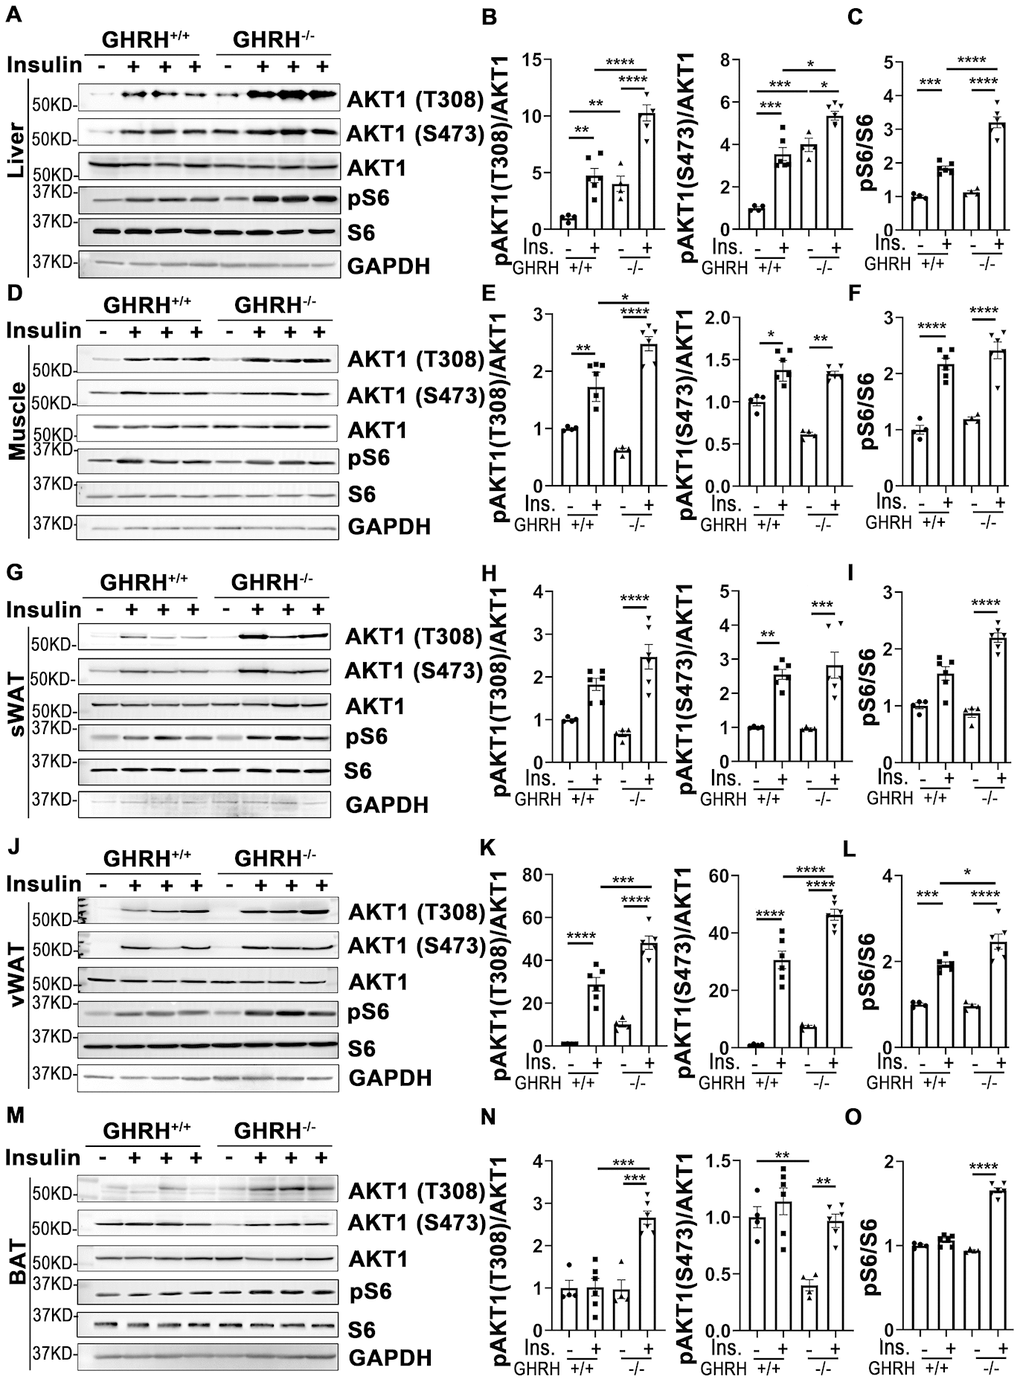 Insulin-induced activation of AKT/S6 cascade in metabolically active tissues of GHRH-/- mice. (A–C) Activation of AKT and S6 in liver. (D–F) Activation of AKT and S6 in skeletal muscle. (G–I) Activation of AKT and S6 in subcutaneous white adipose tissue. (J–L) Activation of AKT and S6 in visceral white adipose tissue. (M–O) Activation of AKT and S6 in interscapular brown adipose tissue. The 4 hours fasted mice were injected i.p. with porcine insulin (1 IU/kg of body weight). After 20 min, tissues were collected to perform western blots. All data (means ± sem) are expressed as fold change compared to vehicle treated WT controls (defined as 1.0) (n=4 for WT group; n=6 for GHRH-/- mice). Statistical analysis was performed by unpaired Student’s t-test, * P P P P 